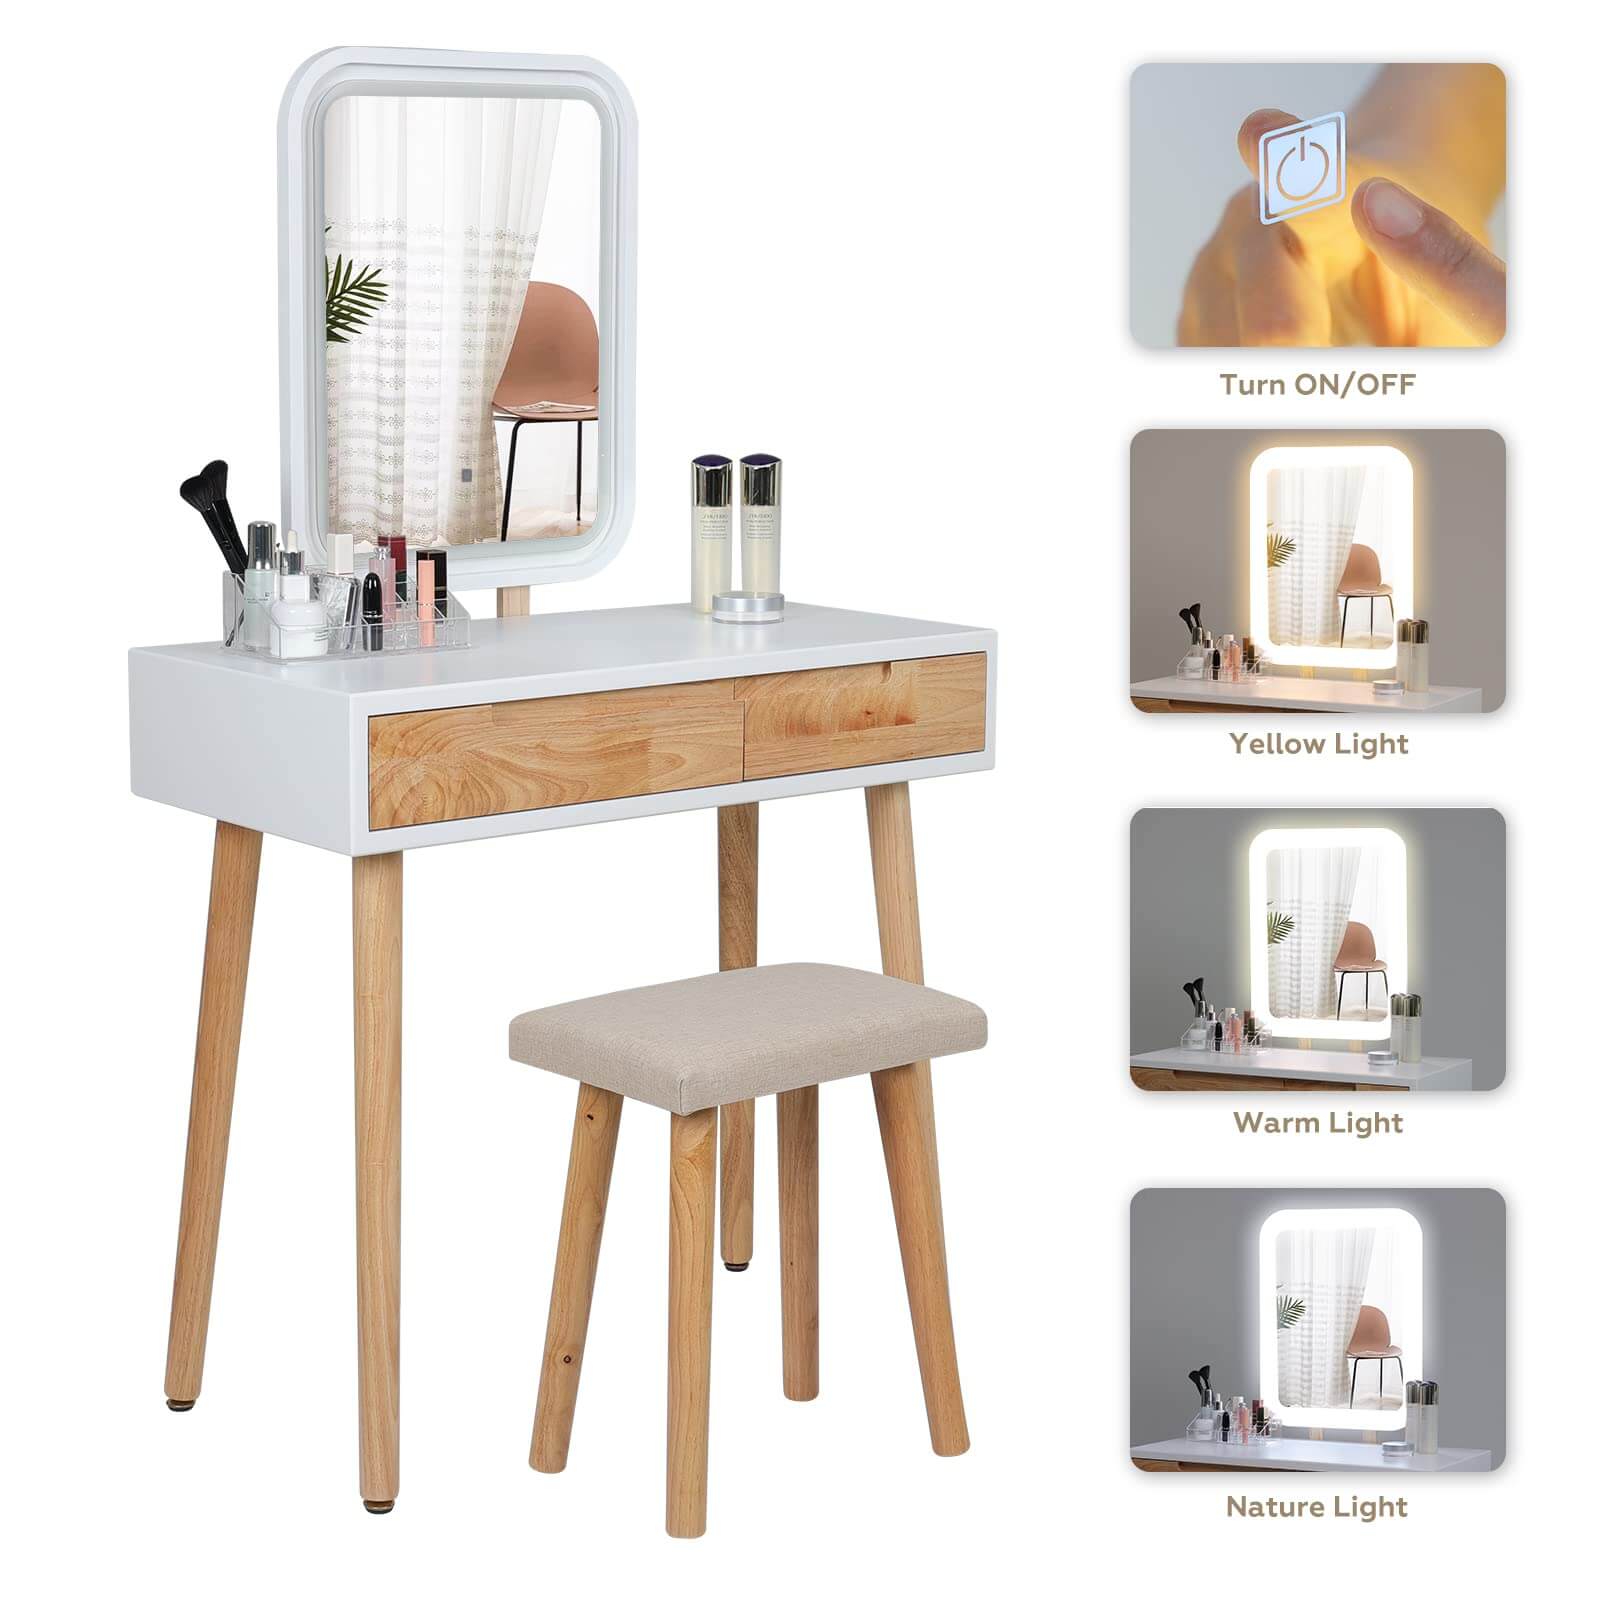 3 different brightness lights of Elecwish Vanity Makeup Table Set with Adjustable LED Square Mirror IF113